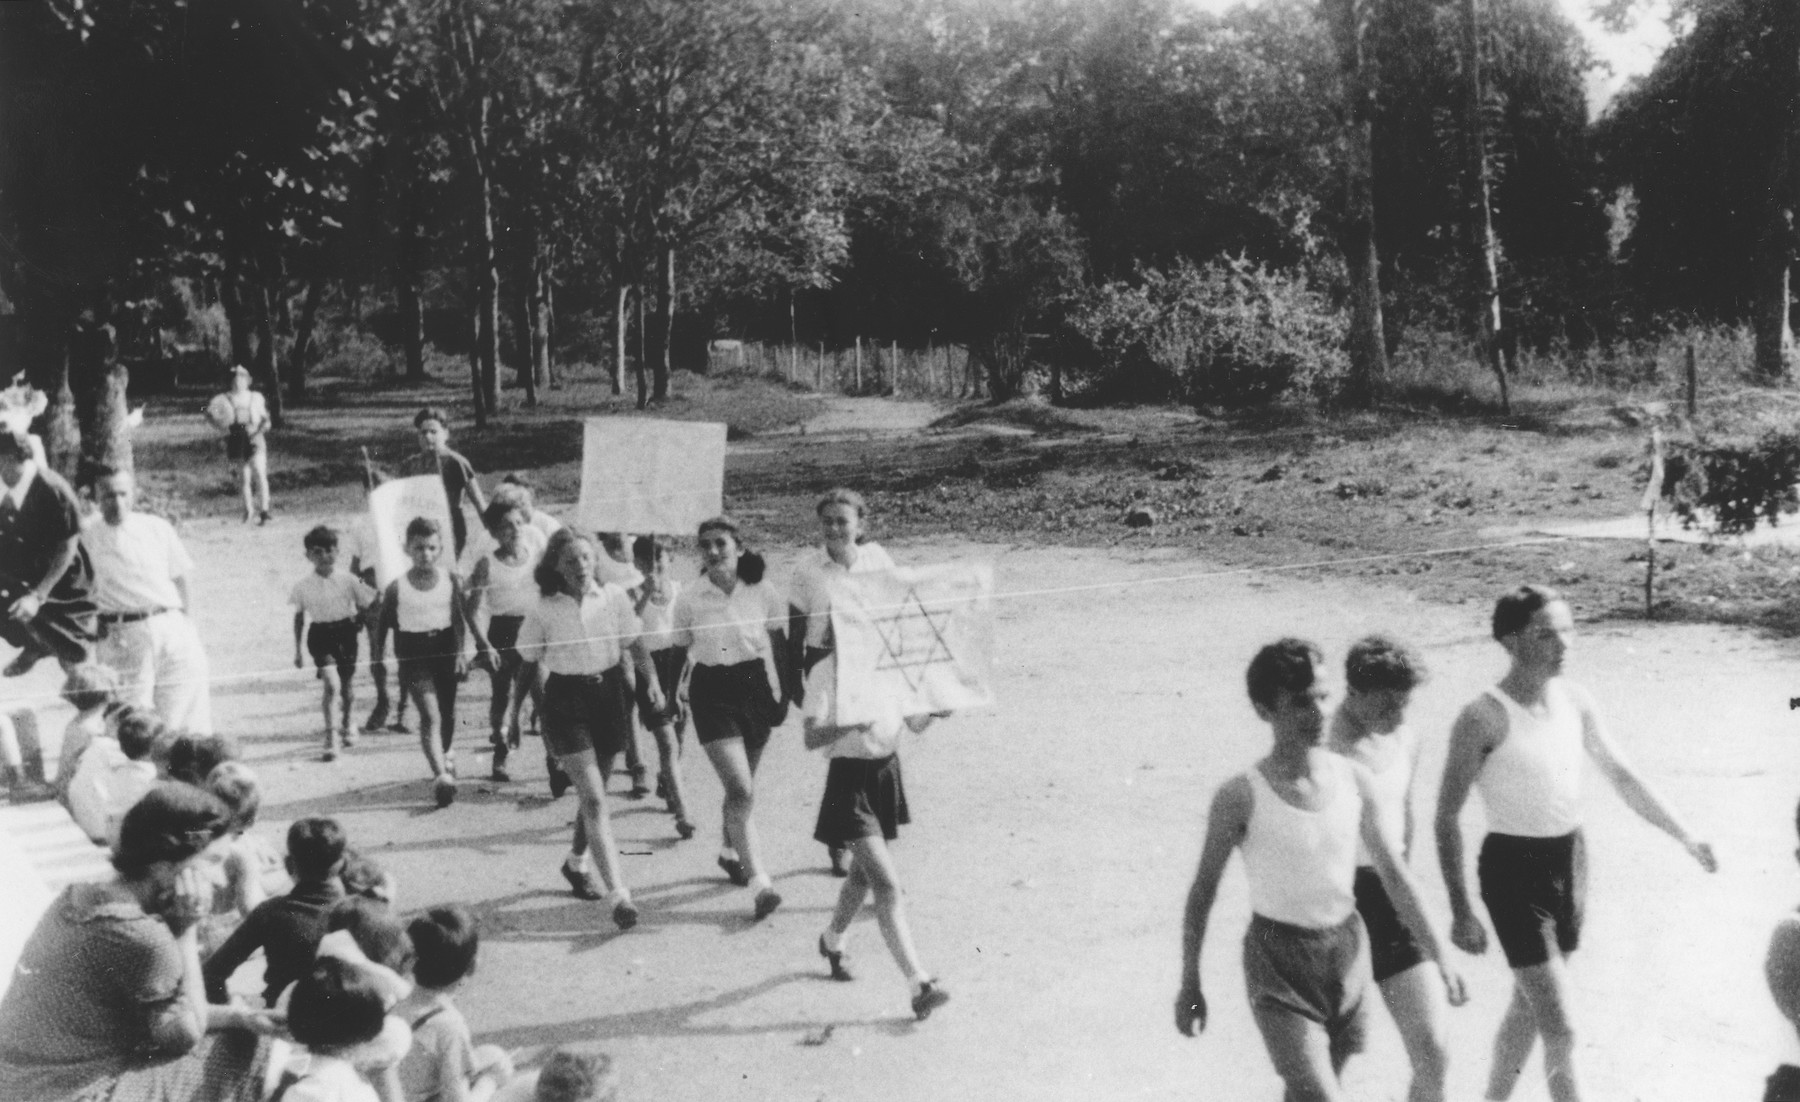 Jewish refugee children march with signs in front of the Chabannes children's home on sports day. 

Later that day, French police raided the home and removed several of the older children, who were then deported to Auschwitz.

Among those pictured are Gerard Rosenzweig, Alex Kramskoi, Angel Haas, Louise Bontnik, Elsi Wolf, Anatole Zilberstein and Stephan Lewy.